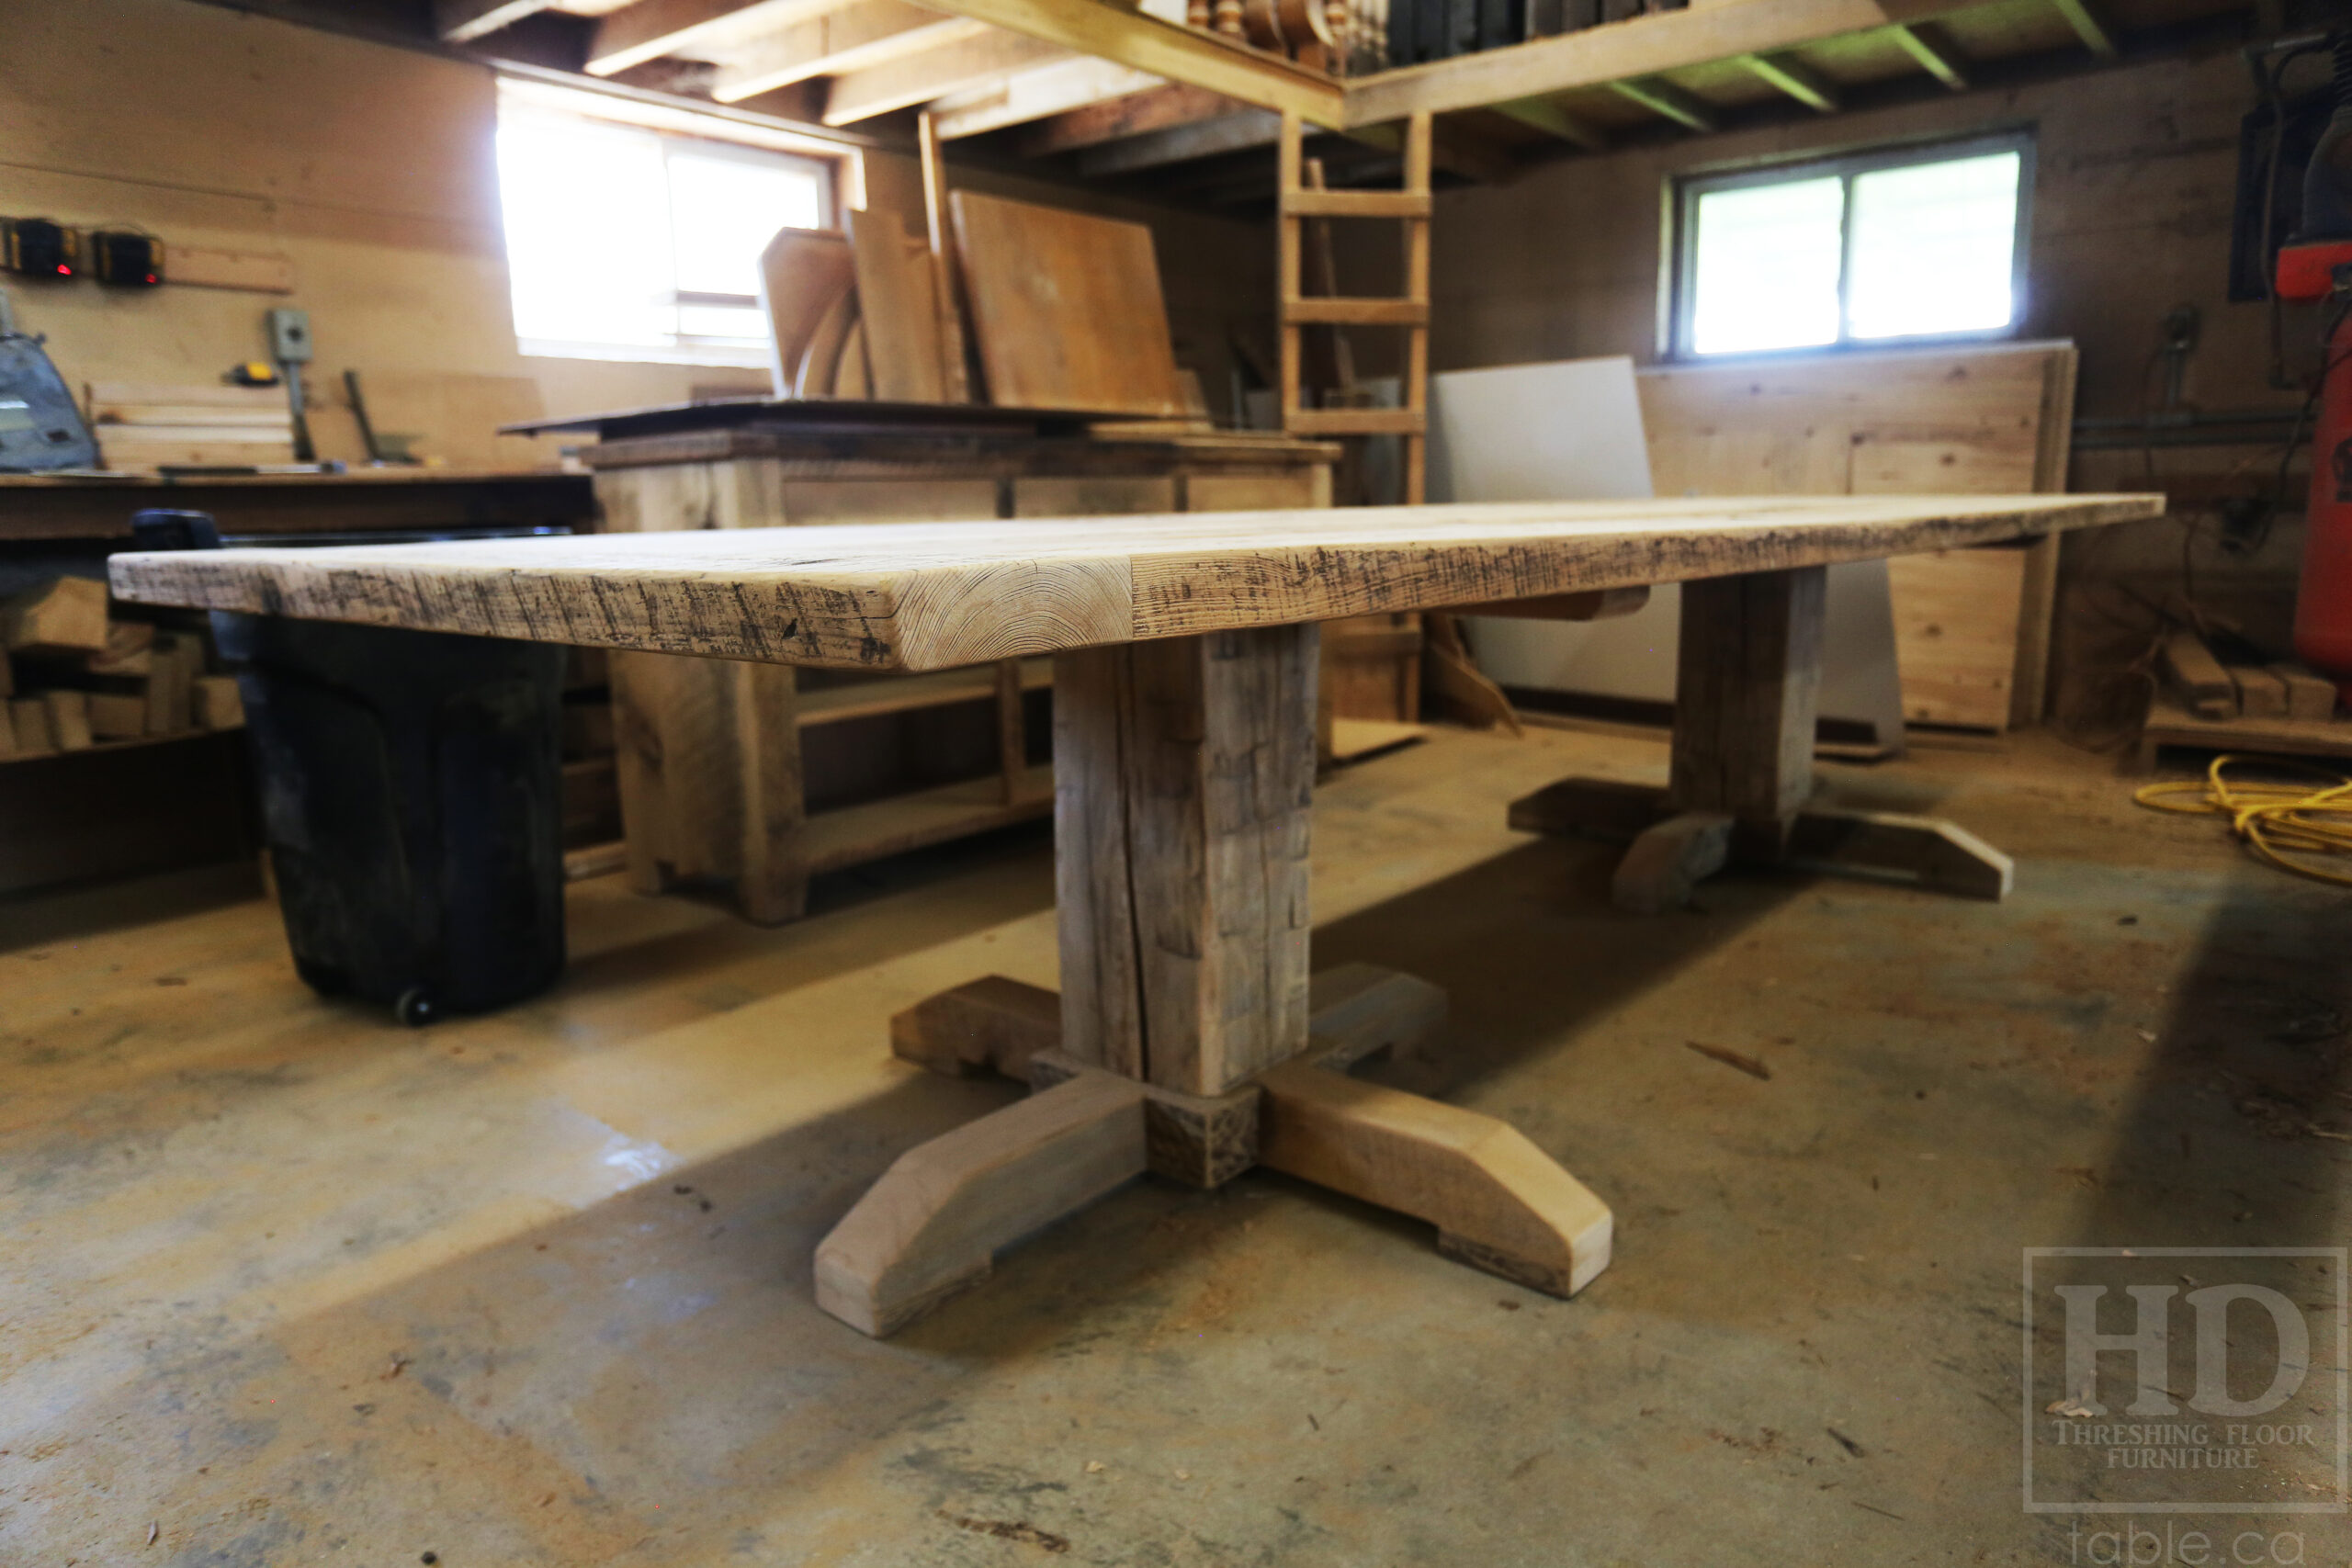 Project Summary: 12’ Reclaimed Ontario Barnwood Table we made for a Fergus, Ontario Company – 48” wide – Metal Logo Embedded - Hand Hewn Beam Pedestals Base - Old Growth Hemlock Threshing Floor Construction - Original edges & distressing maintained – Bread Edge Boards – Greytone Option - Premium epoxy + satin polyurethane finish – www.table.ca